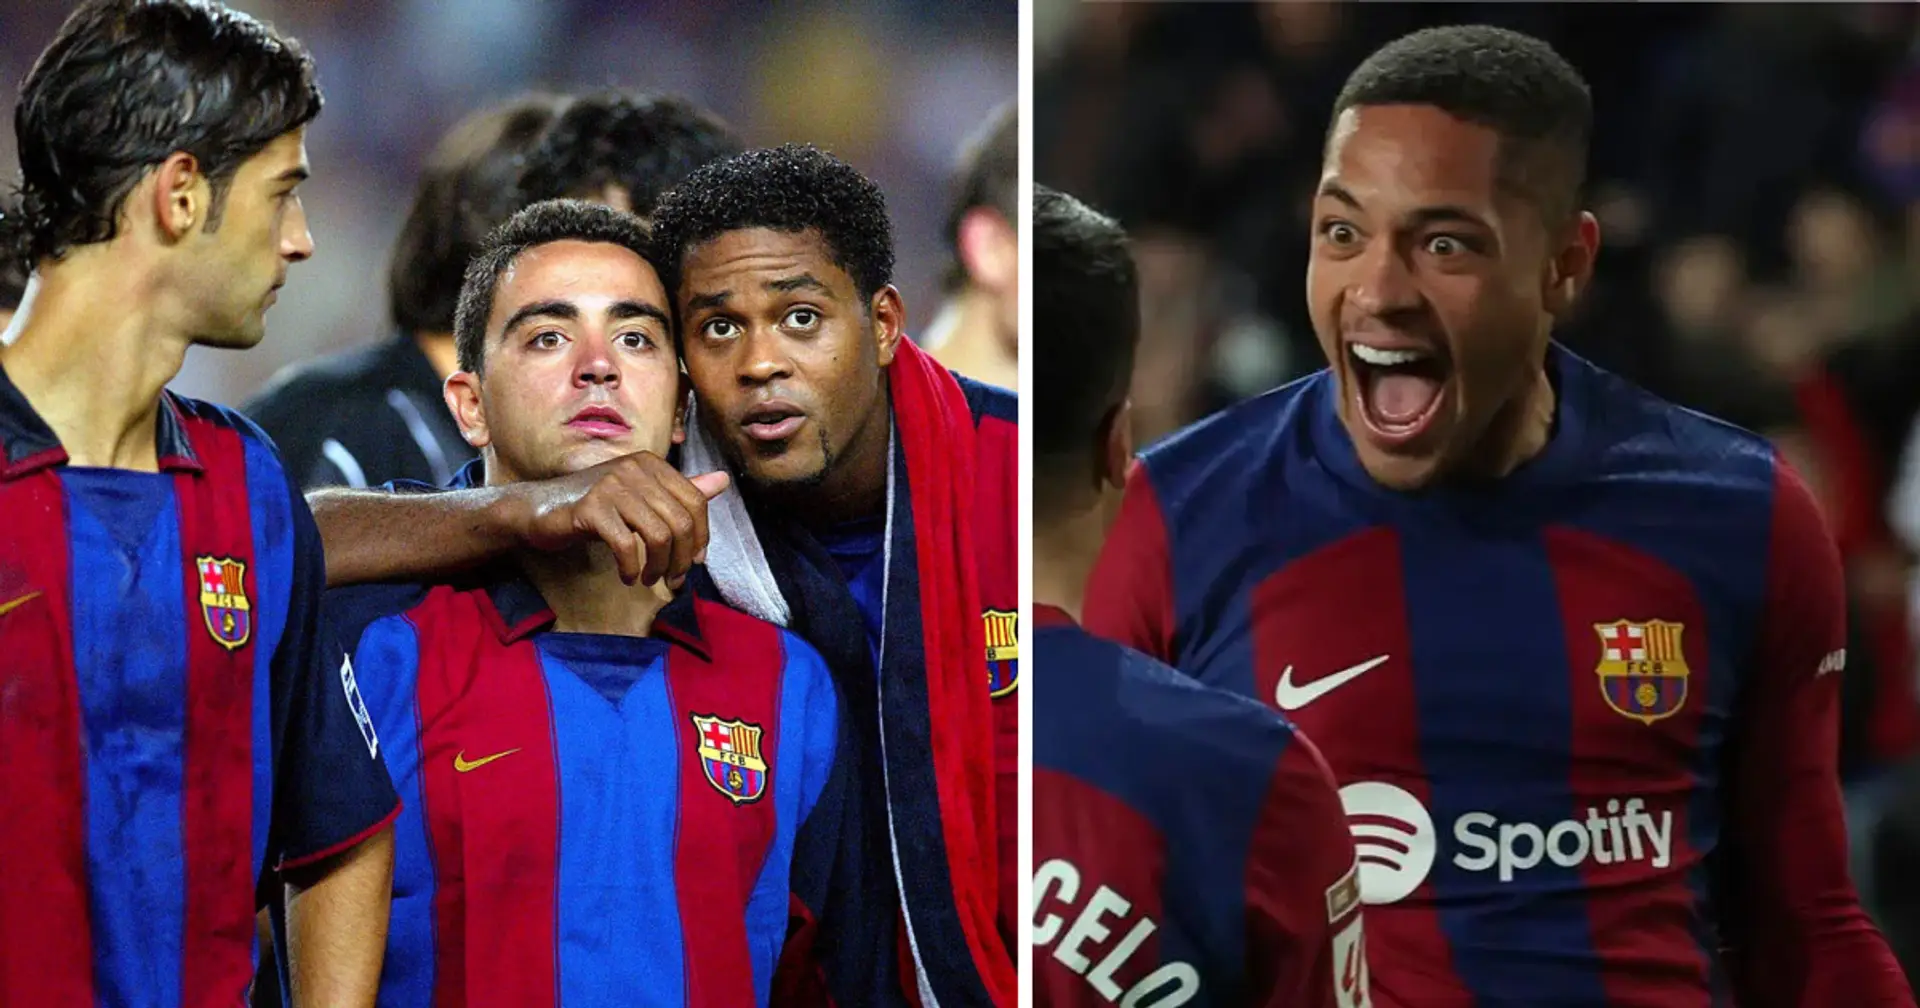 Barca fans compose adorable chant for Vitor Roque – they sang it for club legend